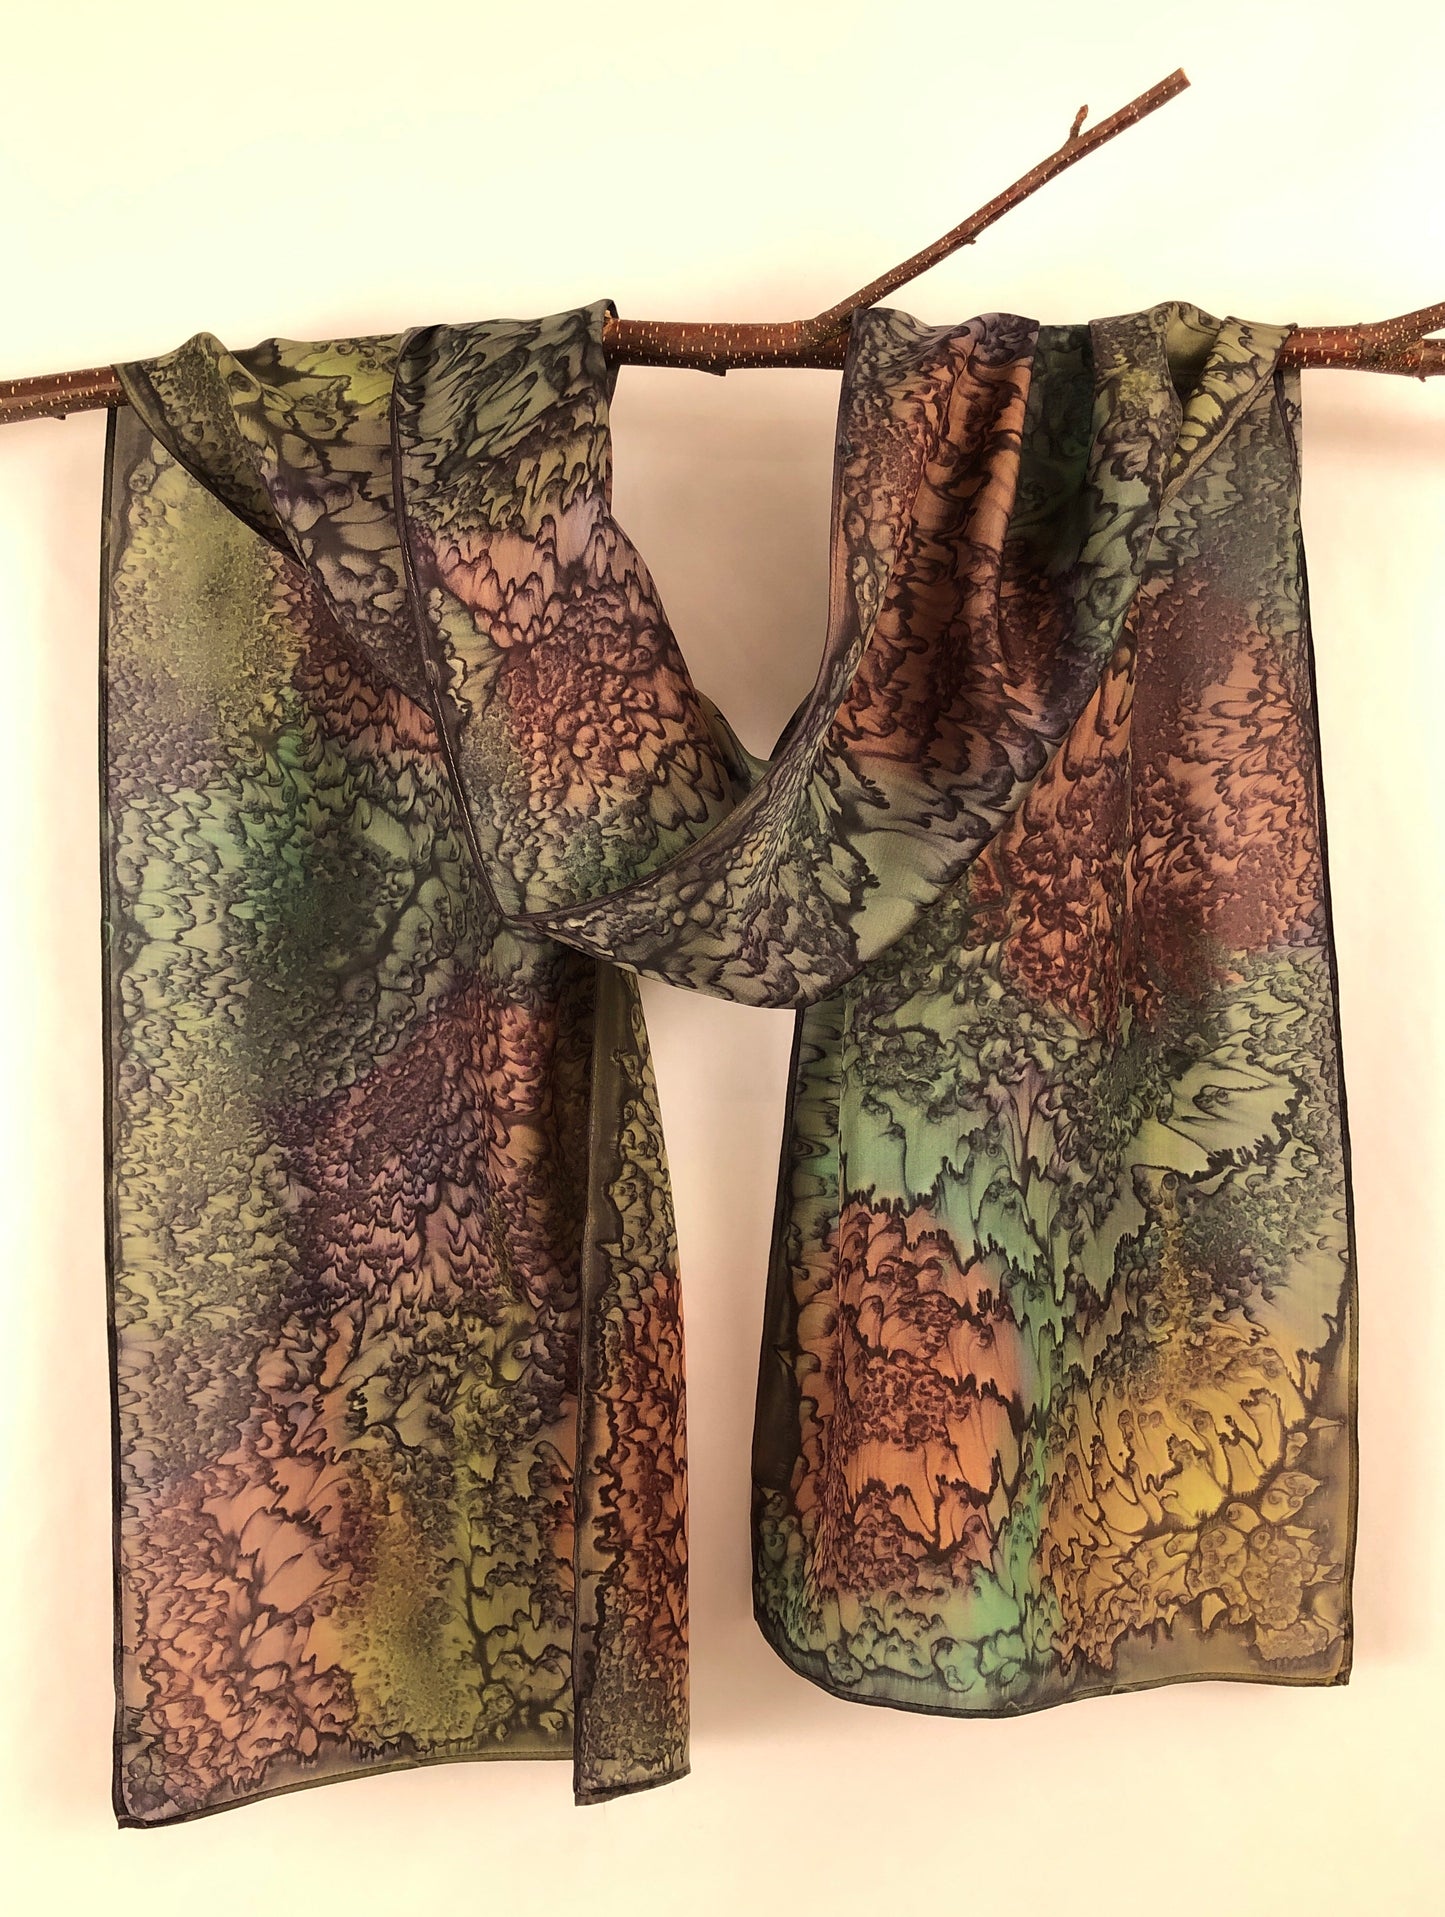 “A Walk in the Woods" - Hand-dyed Silk Scarf - $115